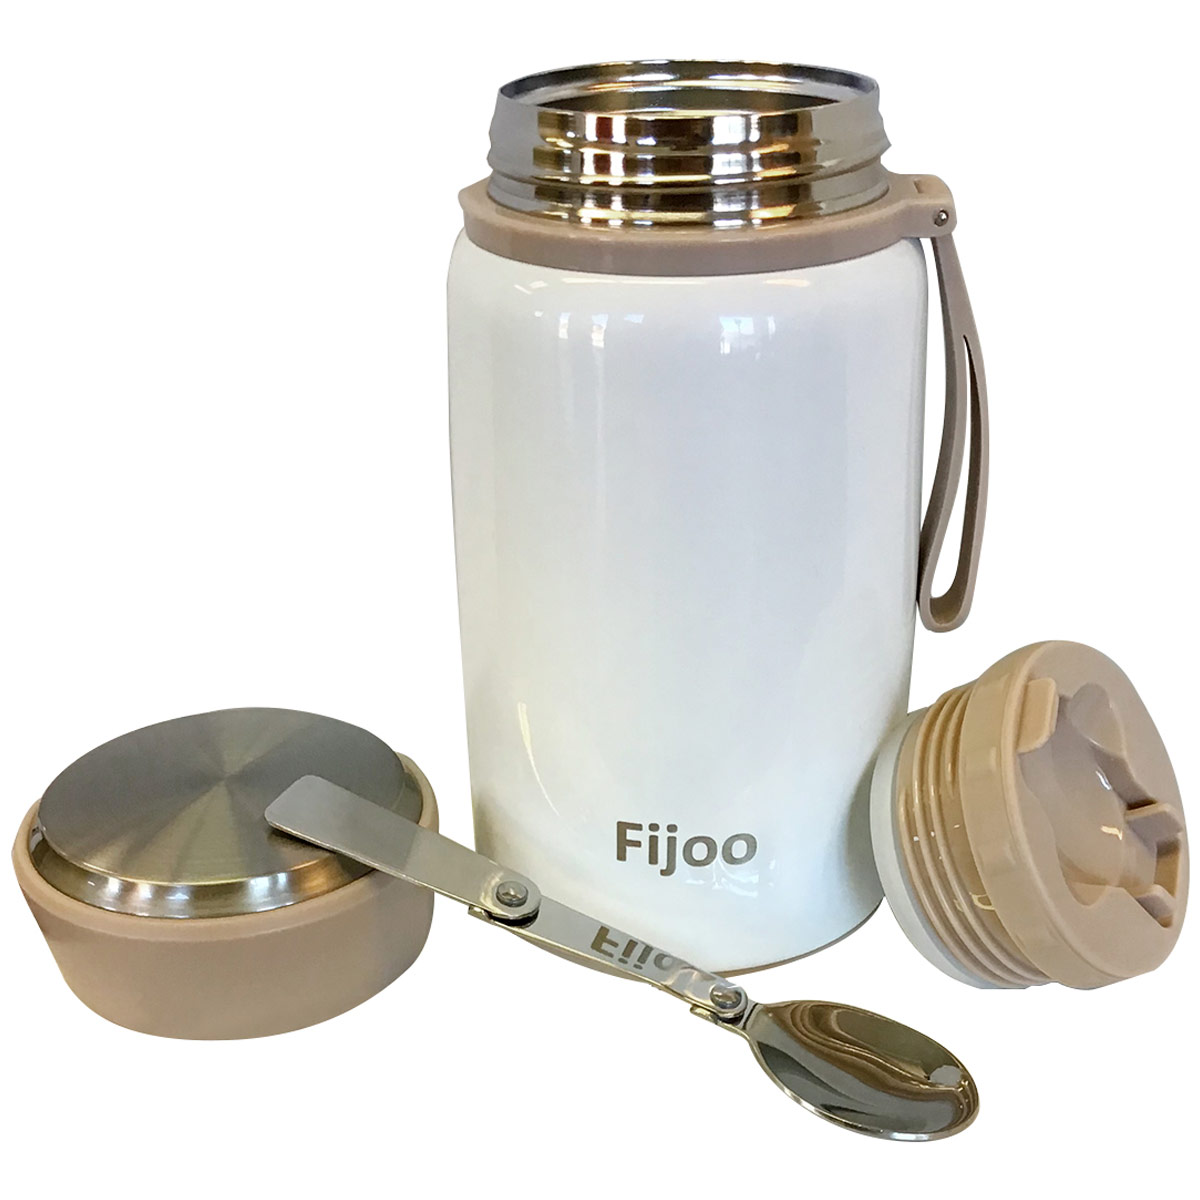 Stainless Steel Thermos Containers